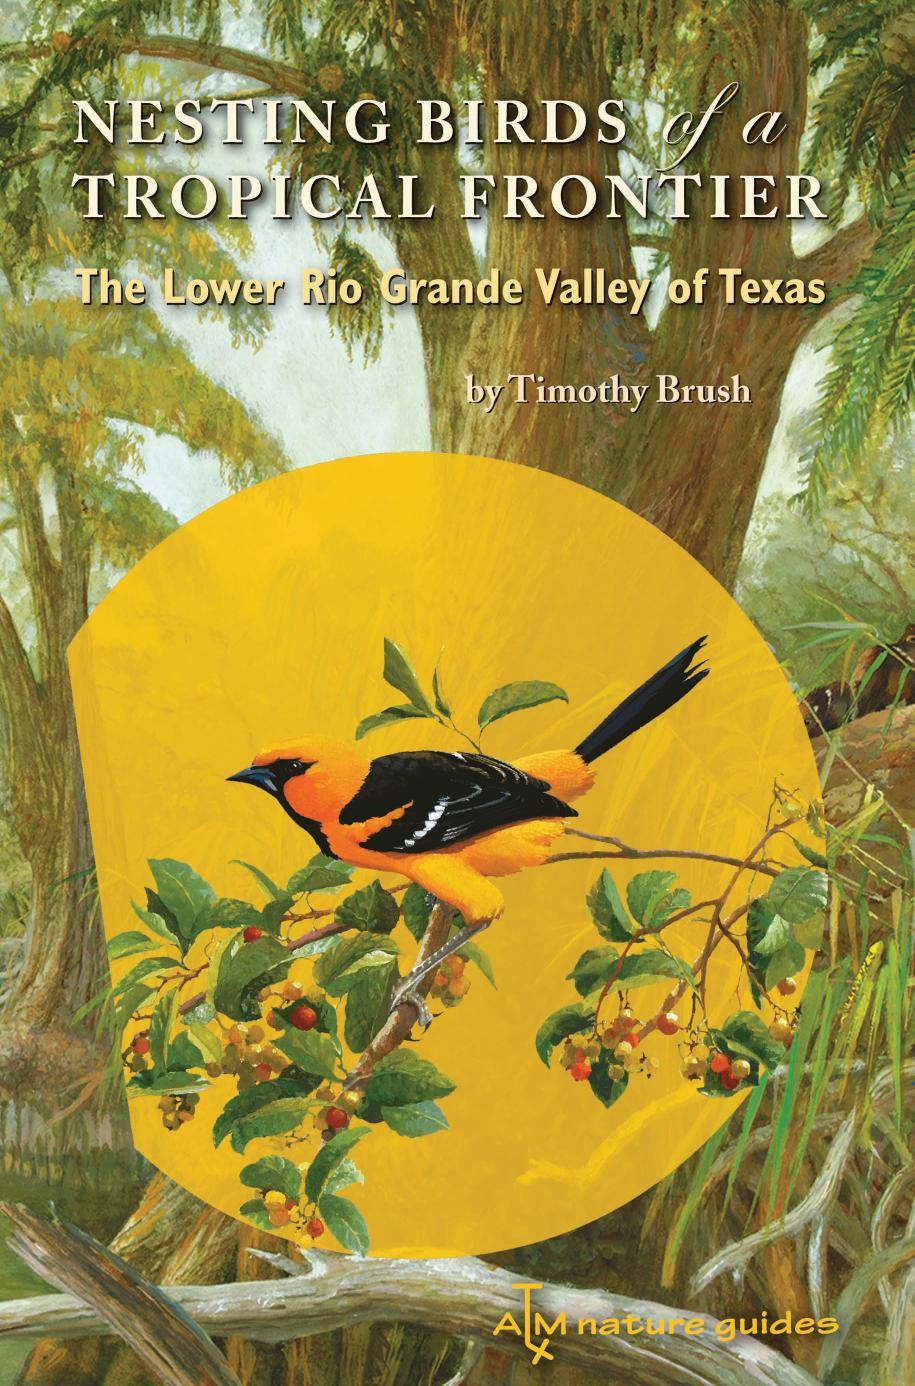 Nesting Birds of a Tropical Frontier: The Lower Rio Grande Valley of Texas by Timothy Brush